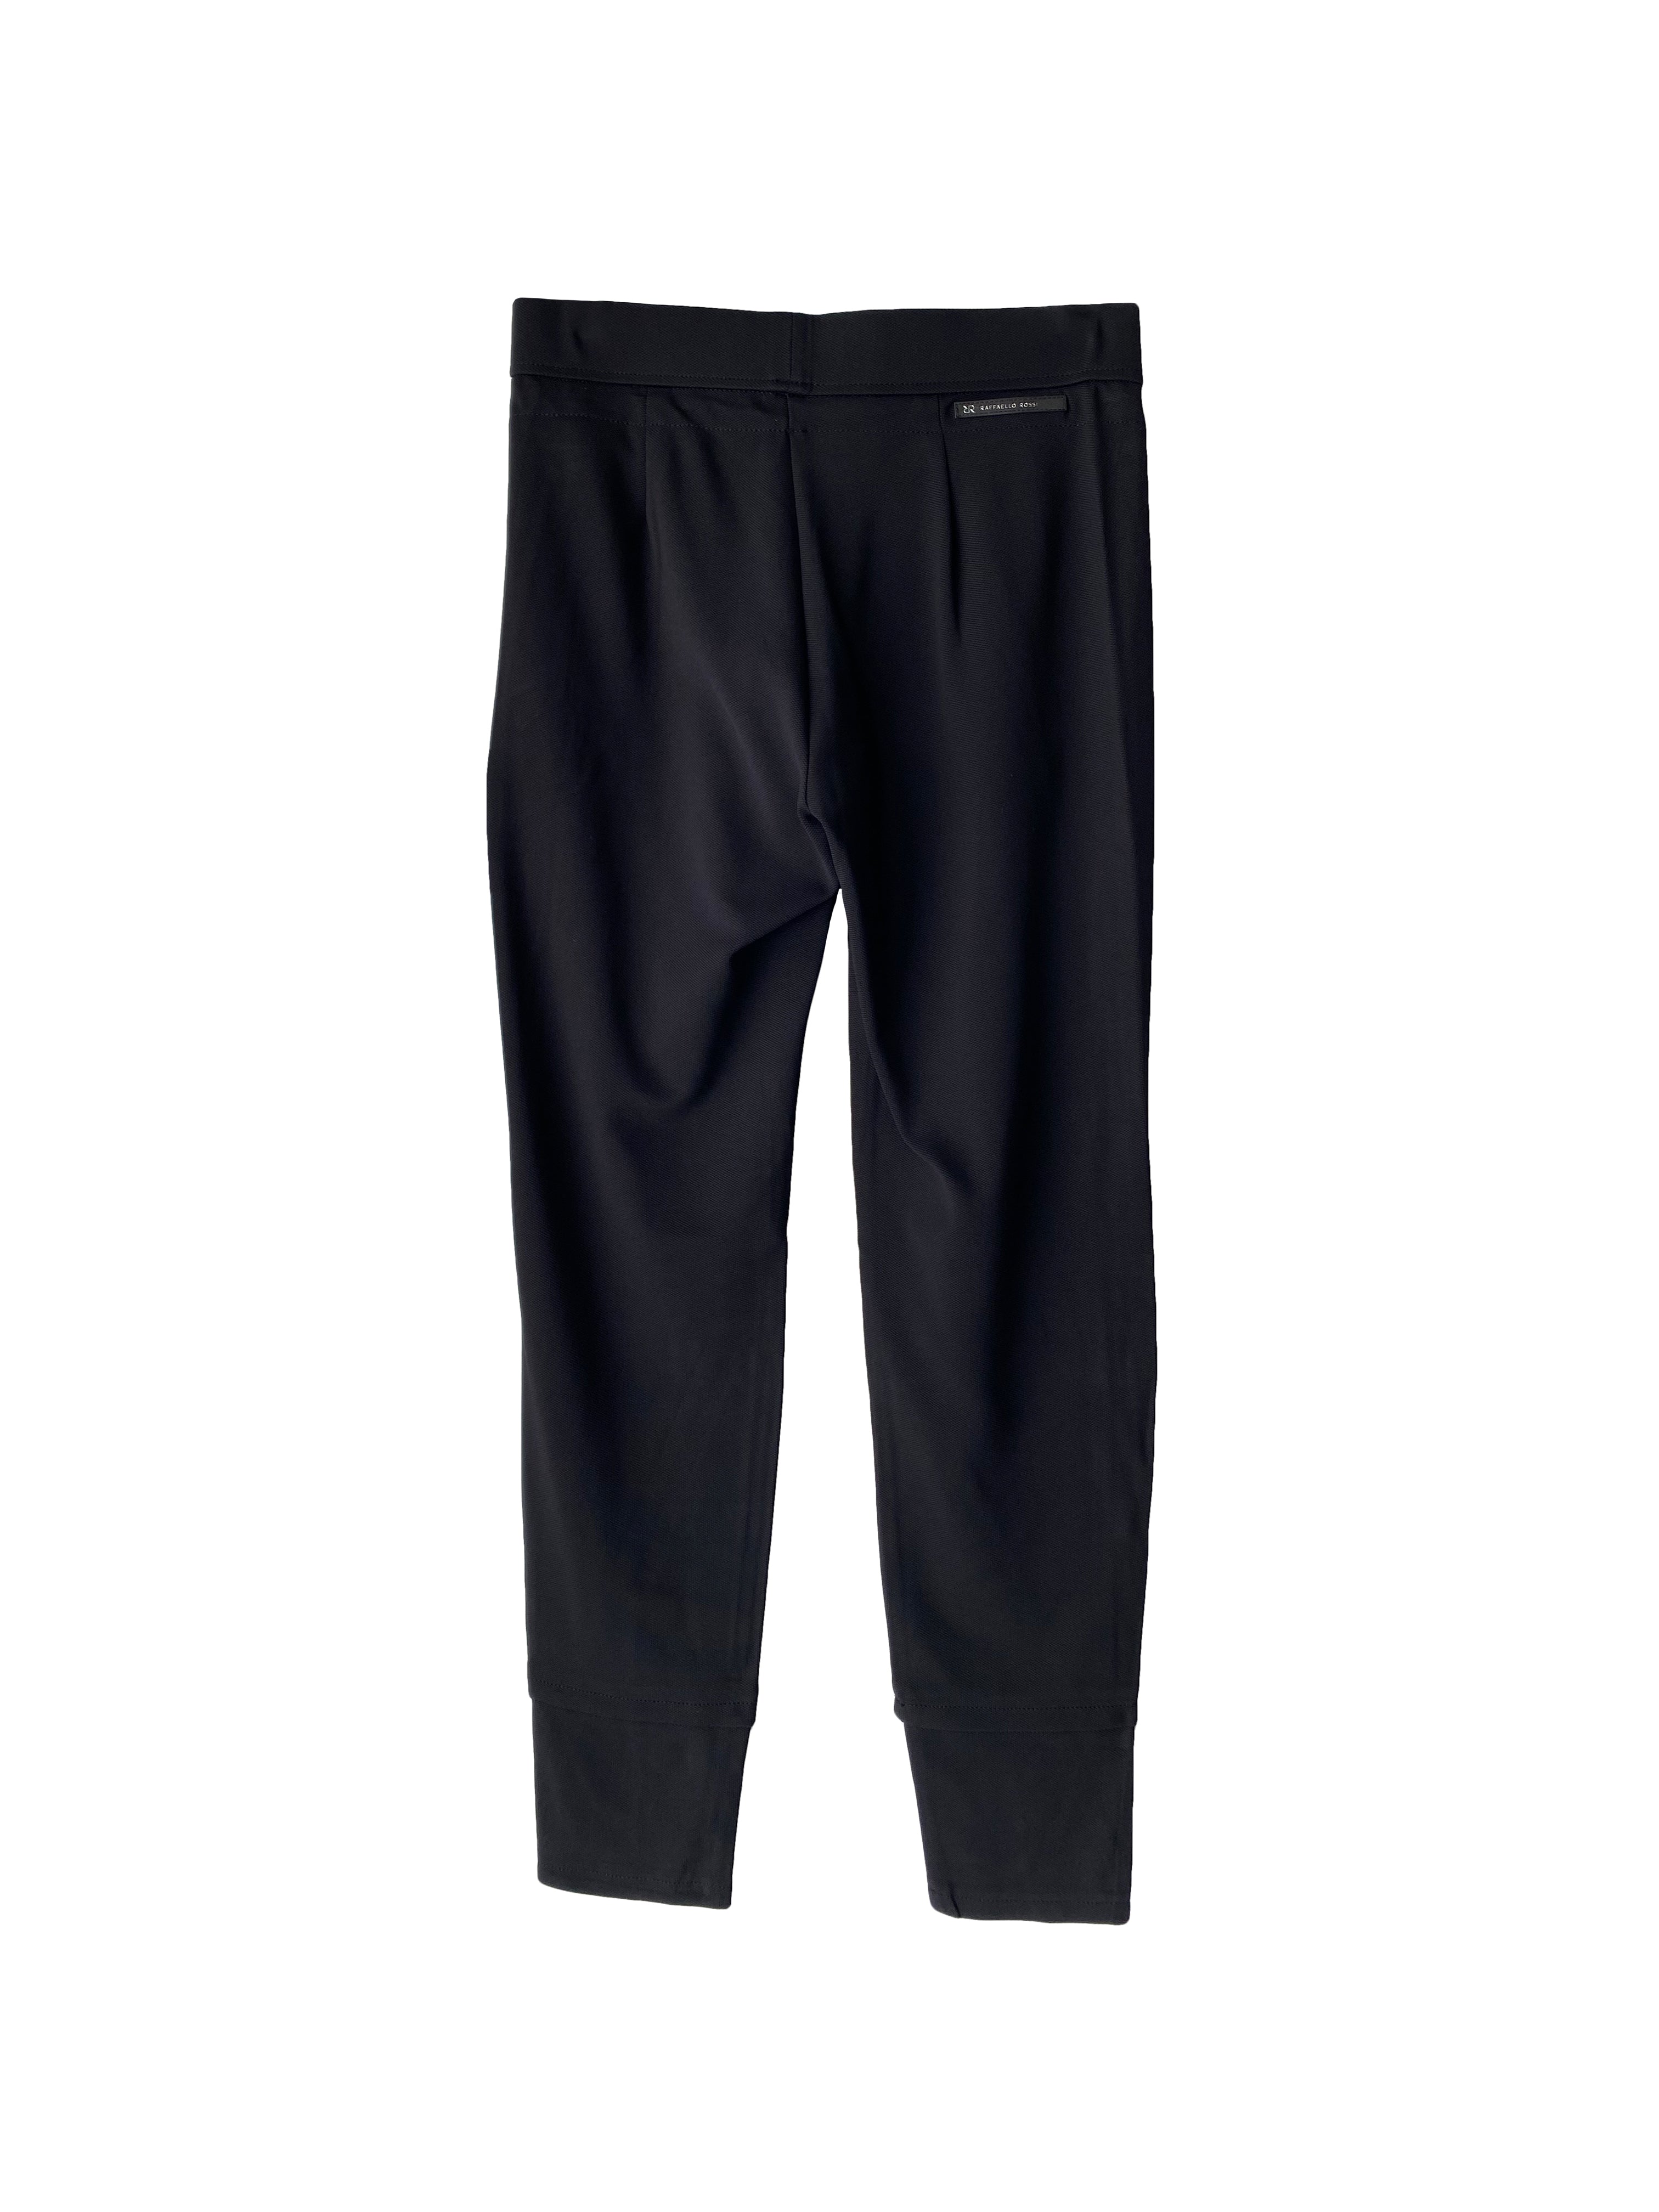 CANDY 0 TEXTURED PANT BLACK